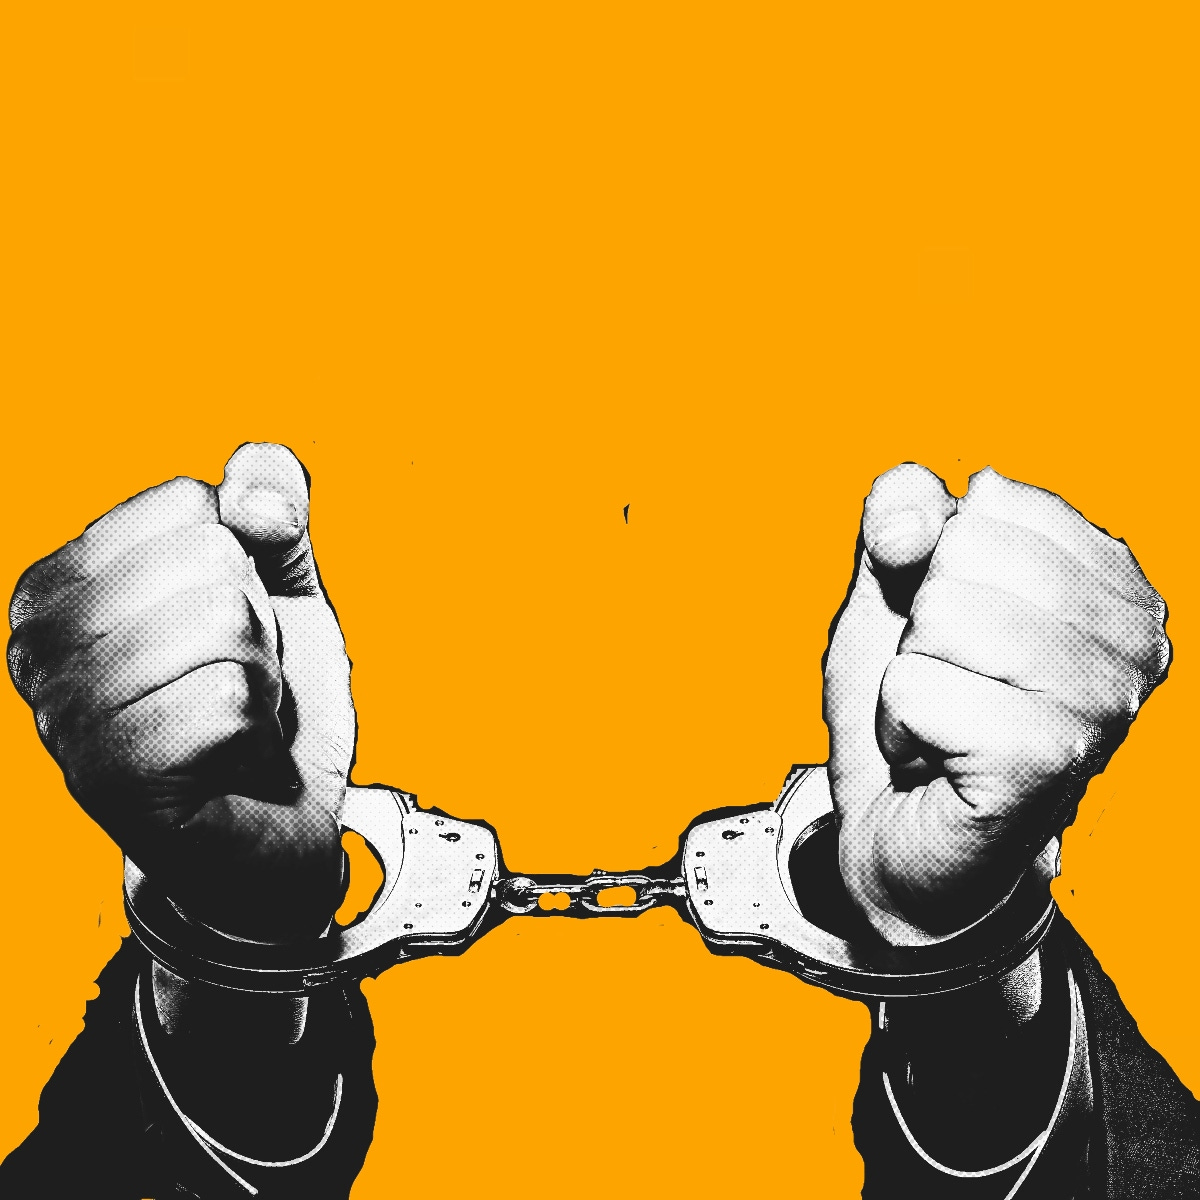 Illustration of hands in handcuffs.